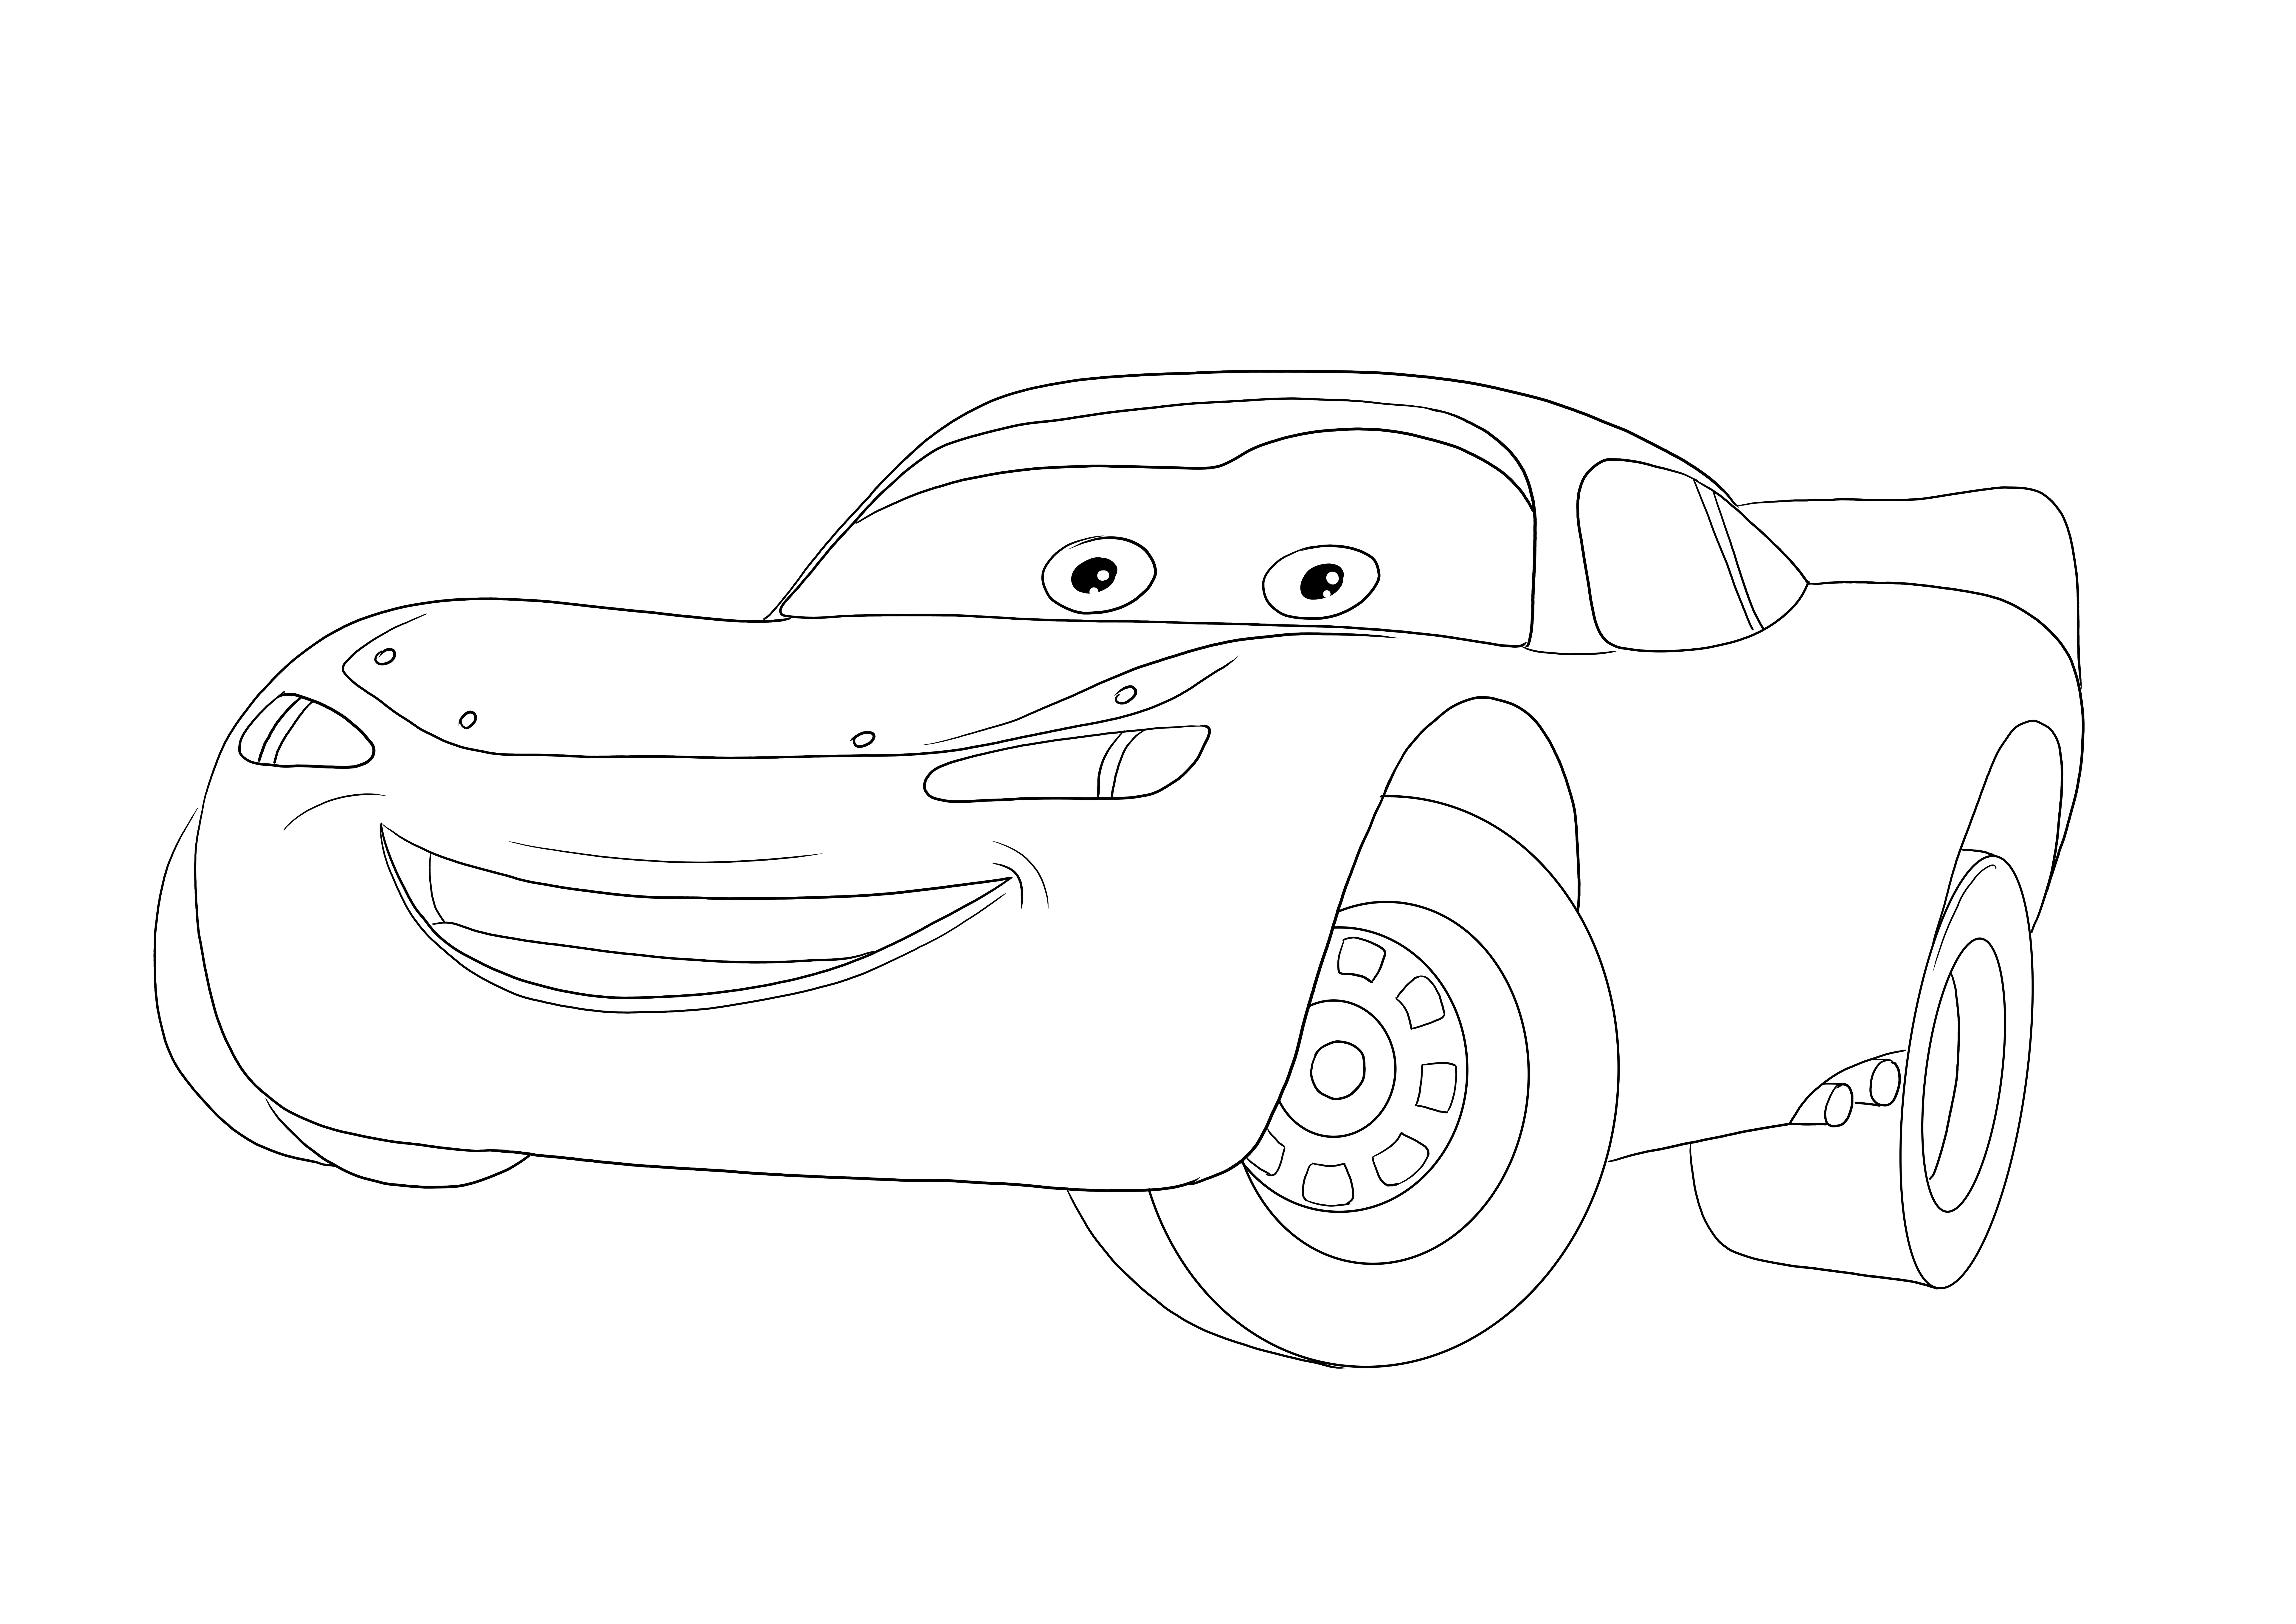 Lightning Macqueen simple coloring sheet free to download for kids